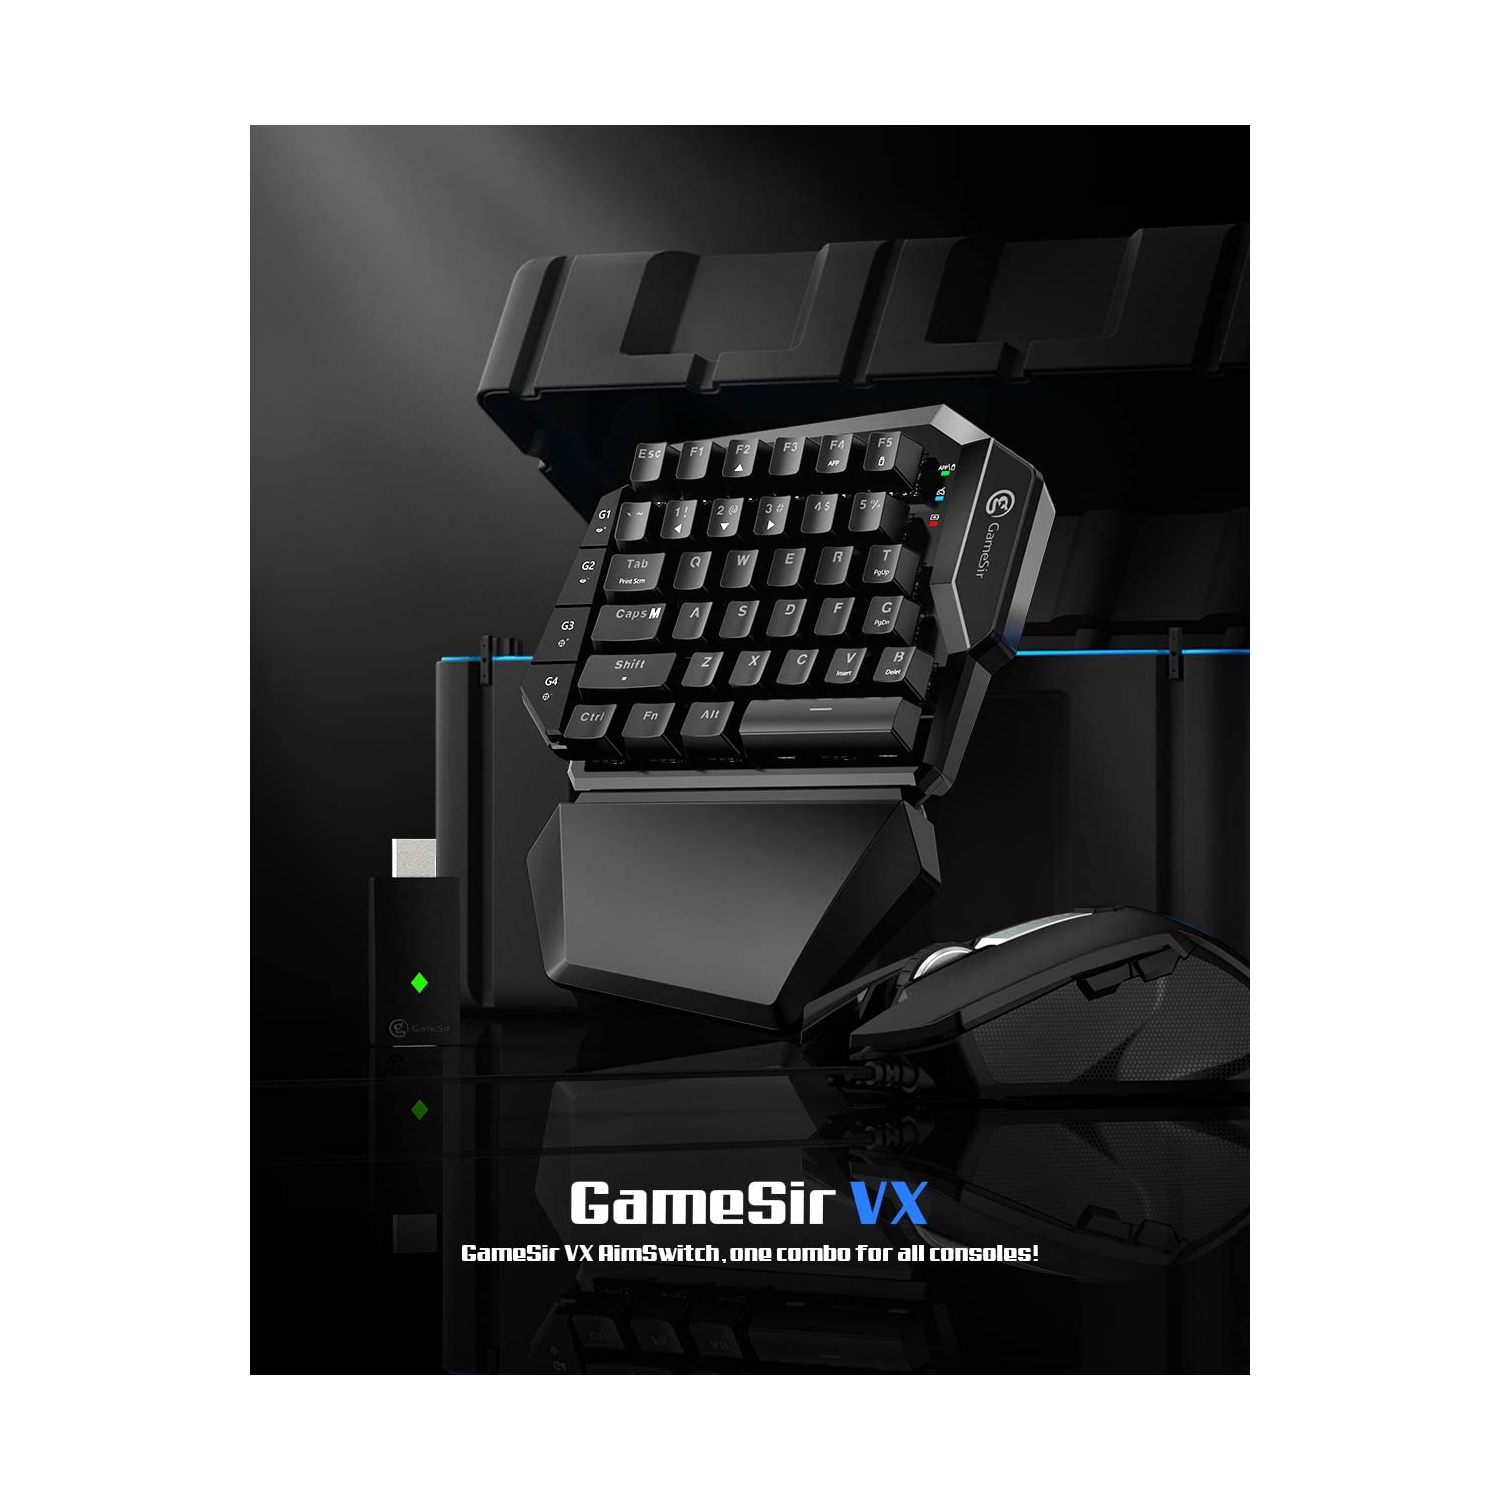 Gamesir Vx Aimswitch Gaming Keyboard And Mouse For Xbox One Ps4 Ps3 Nintendo Switch And Windows Pc Game Keypad Best Buy Canada